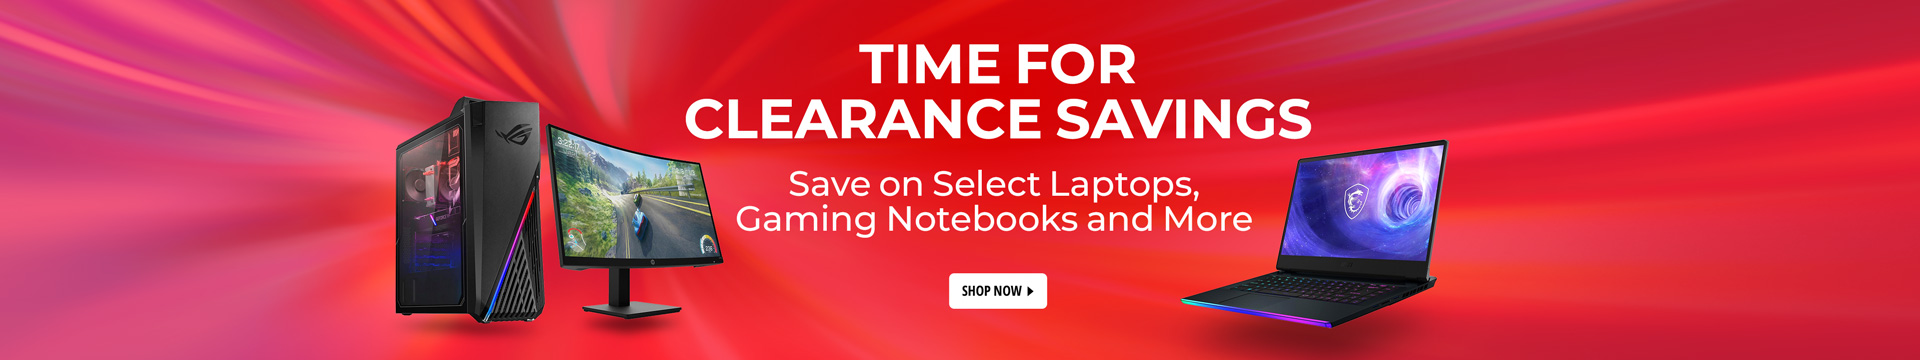 Time for clearance savings